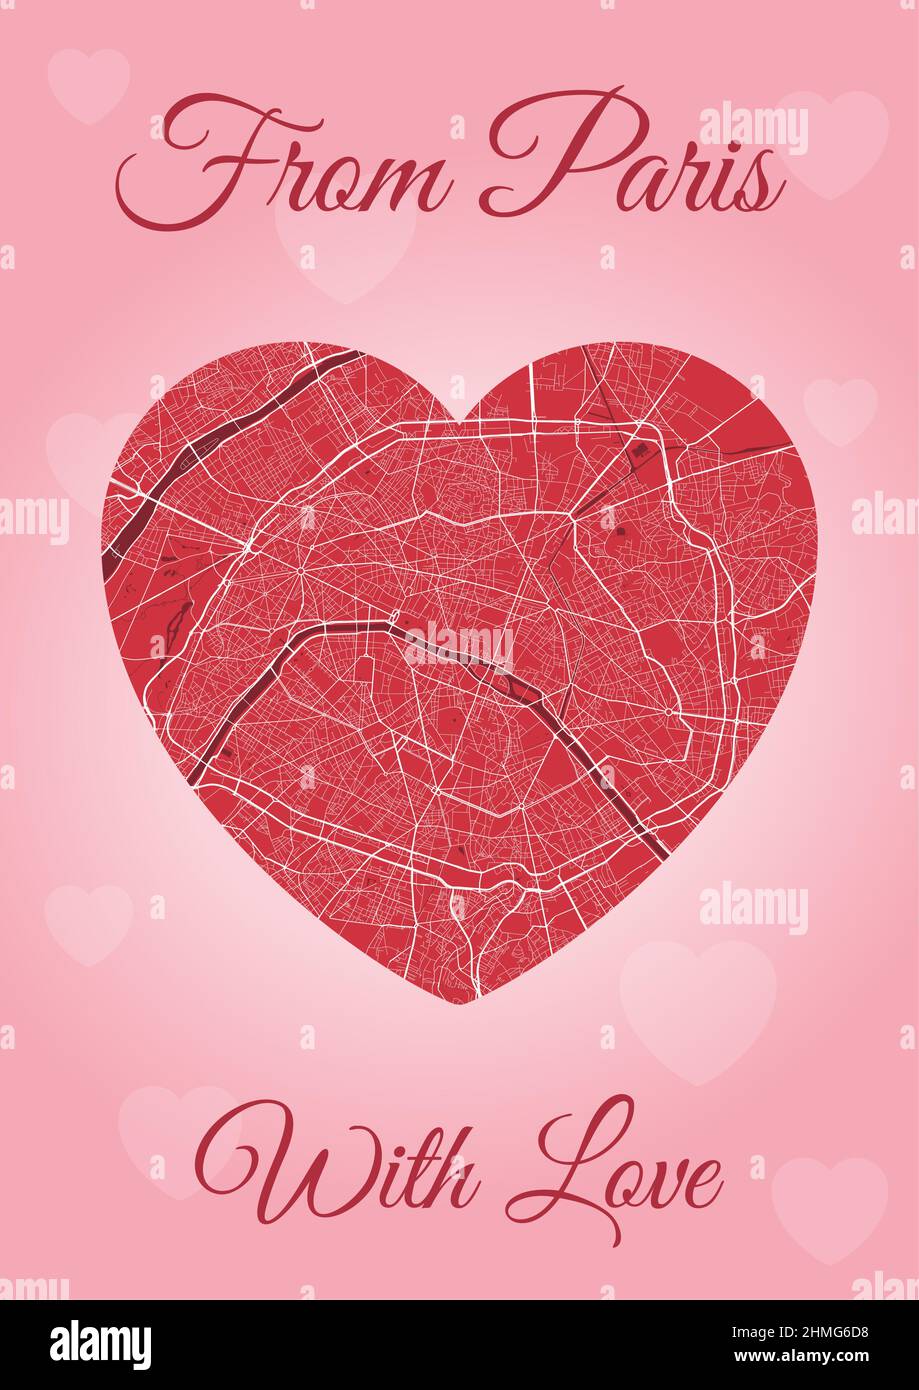 From Paris with love card, city map in heart shape. Vertical A4 Pink and red color vector illustration. Love city travel cityscape. Stock Vector